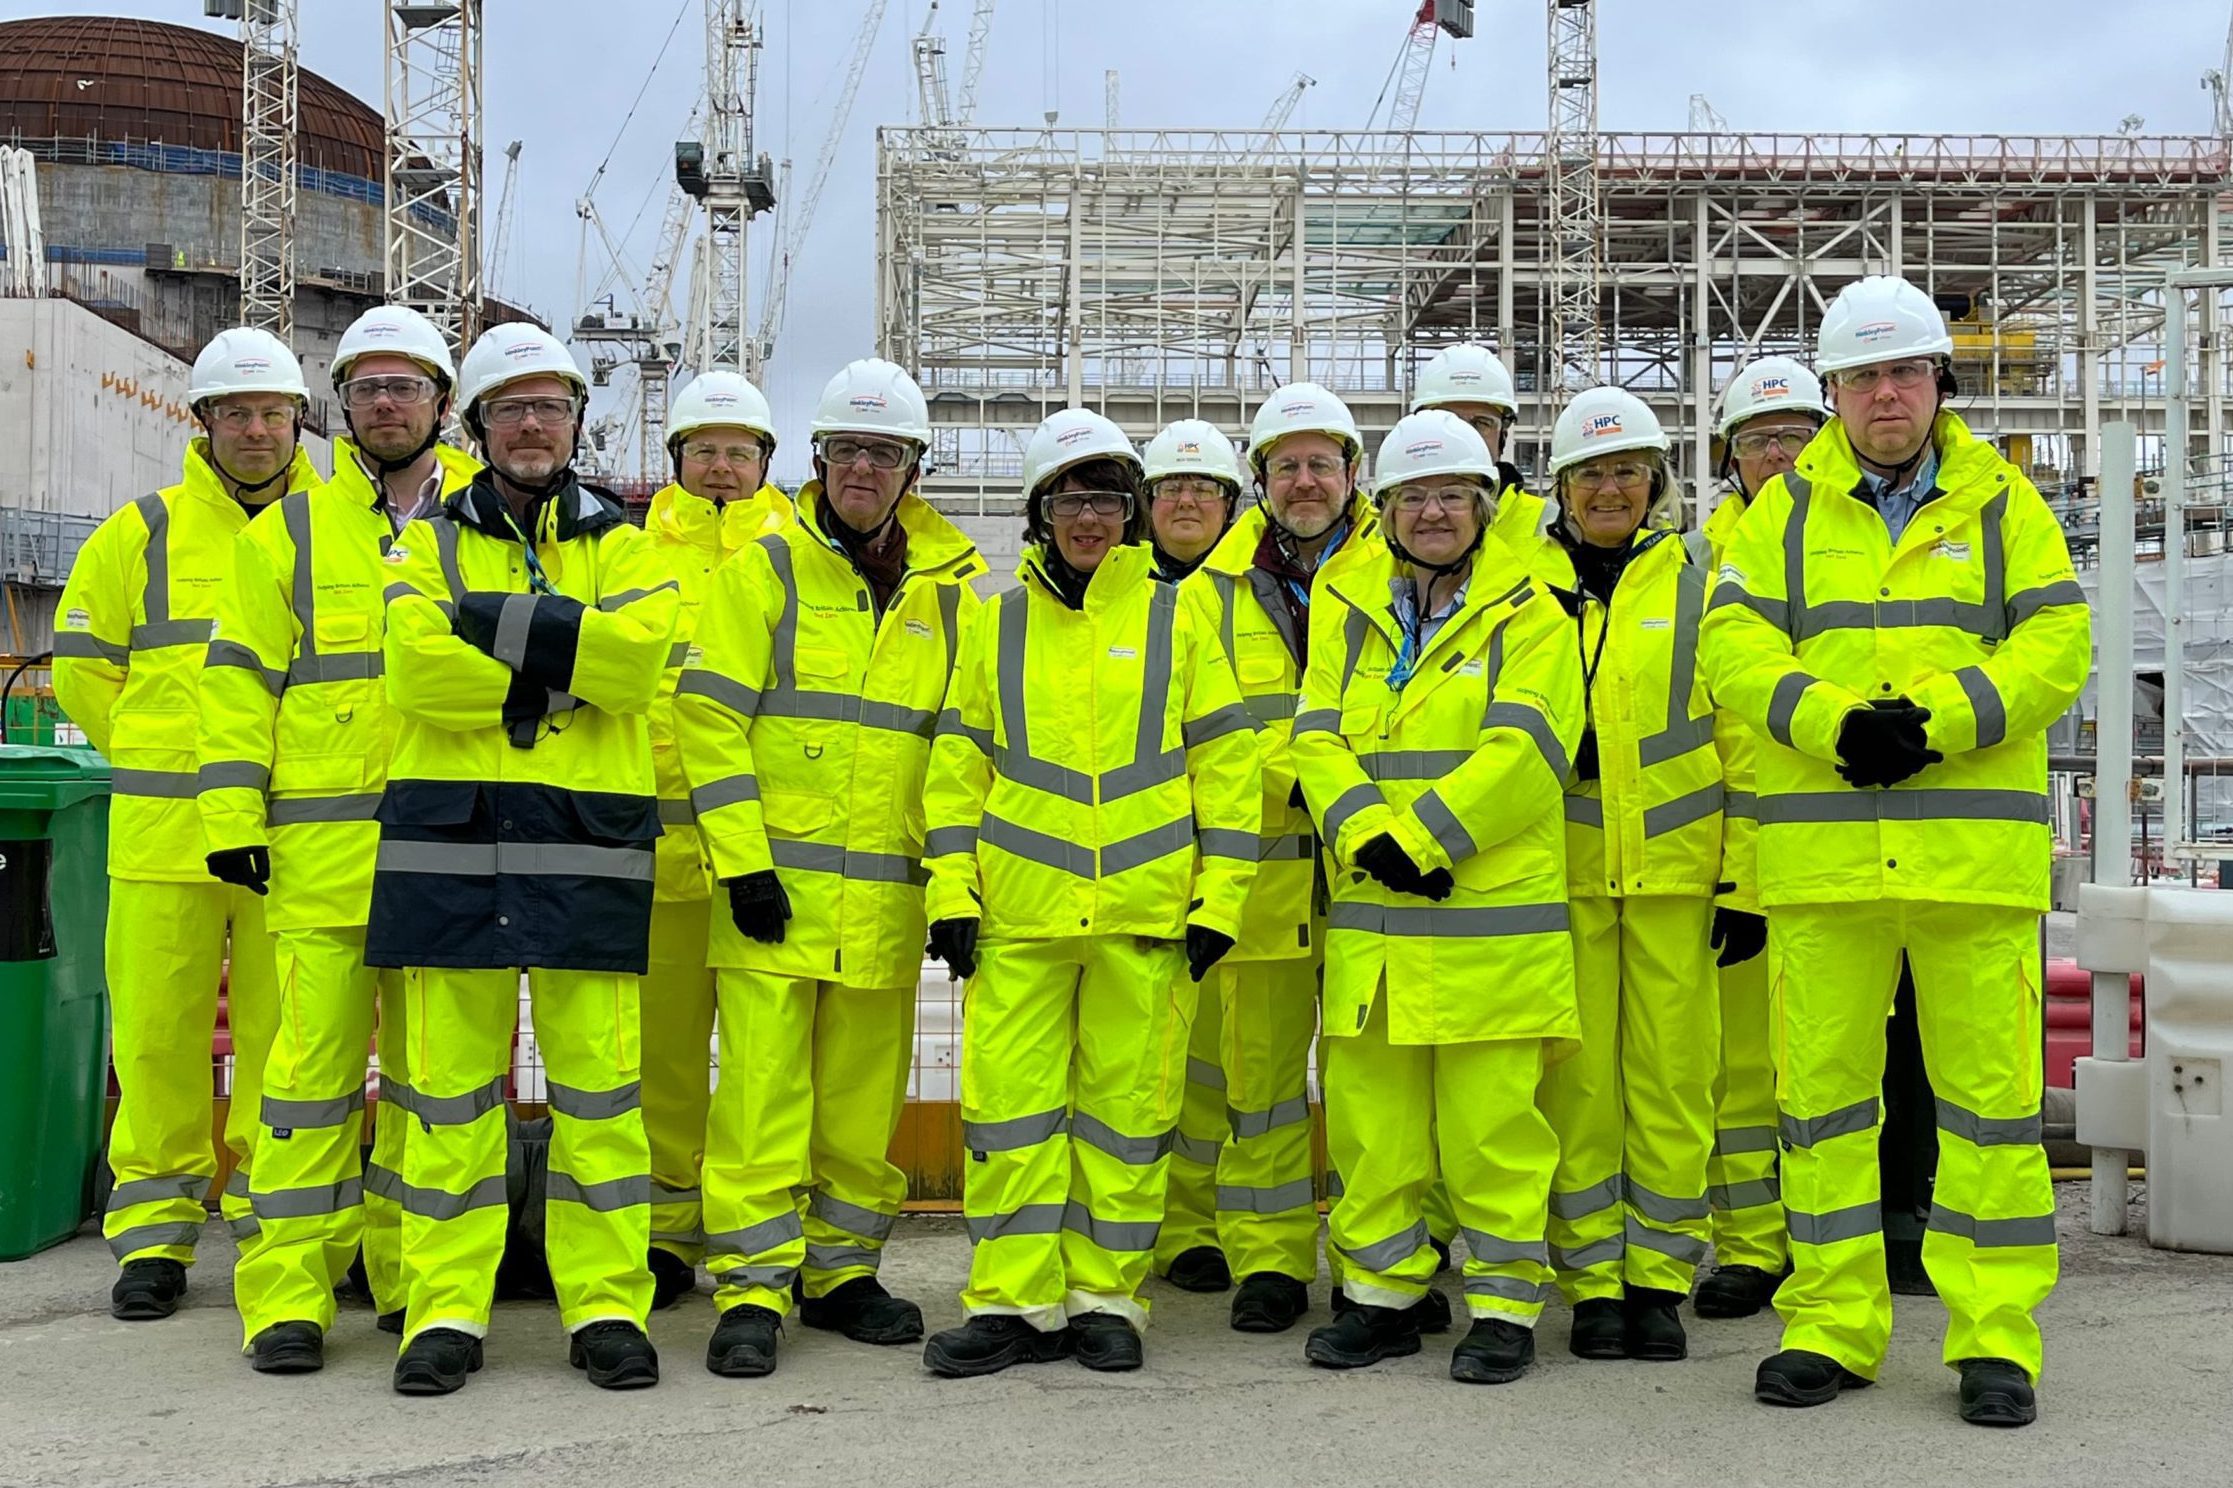 The ECITB Delegation On A Tour Of The Hinkley Point C Site Scaled 1 Aspect Ratio 1200 800